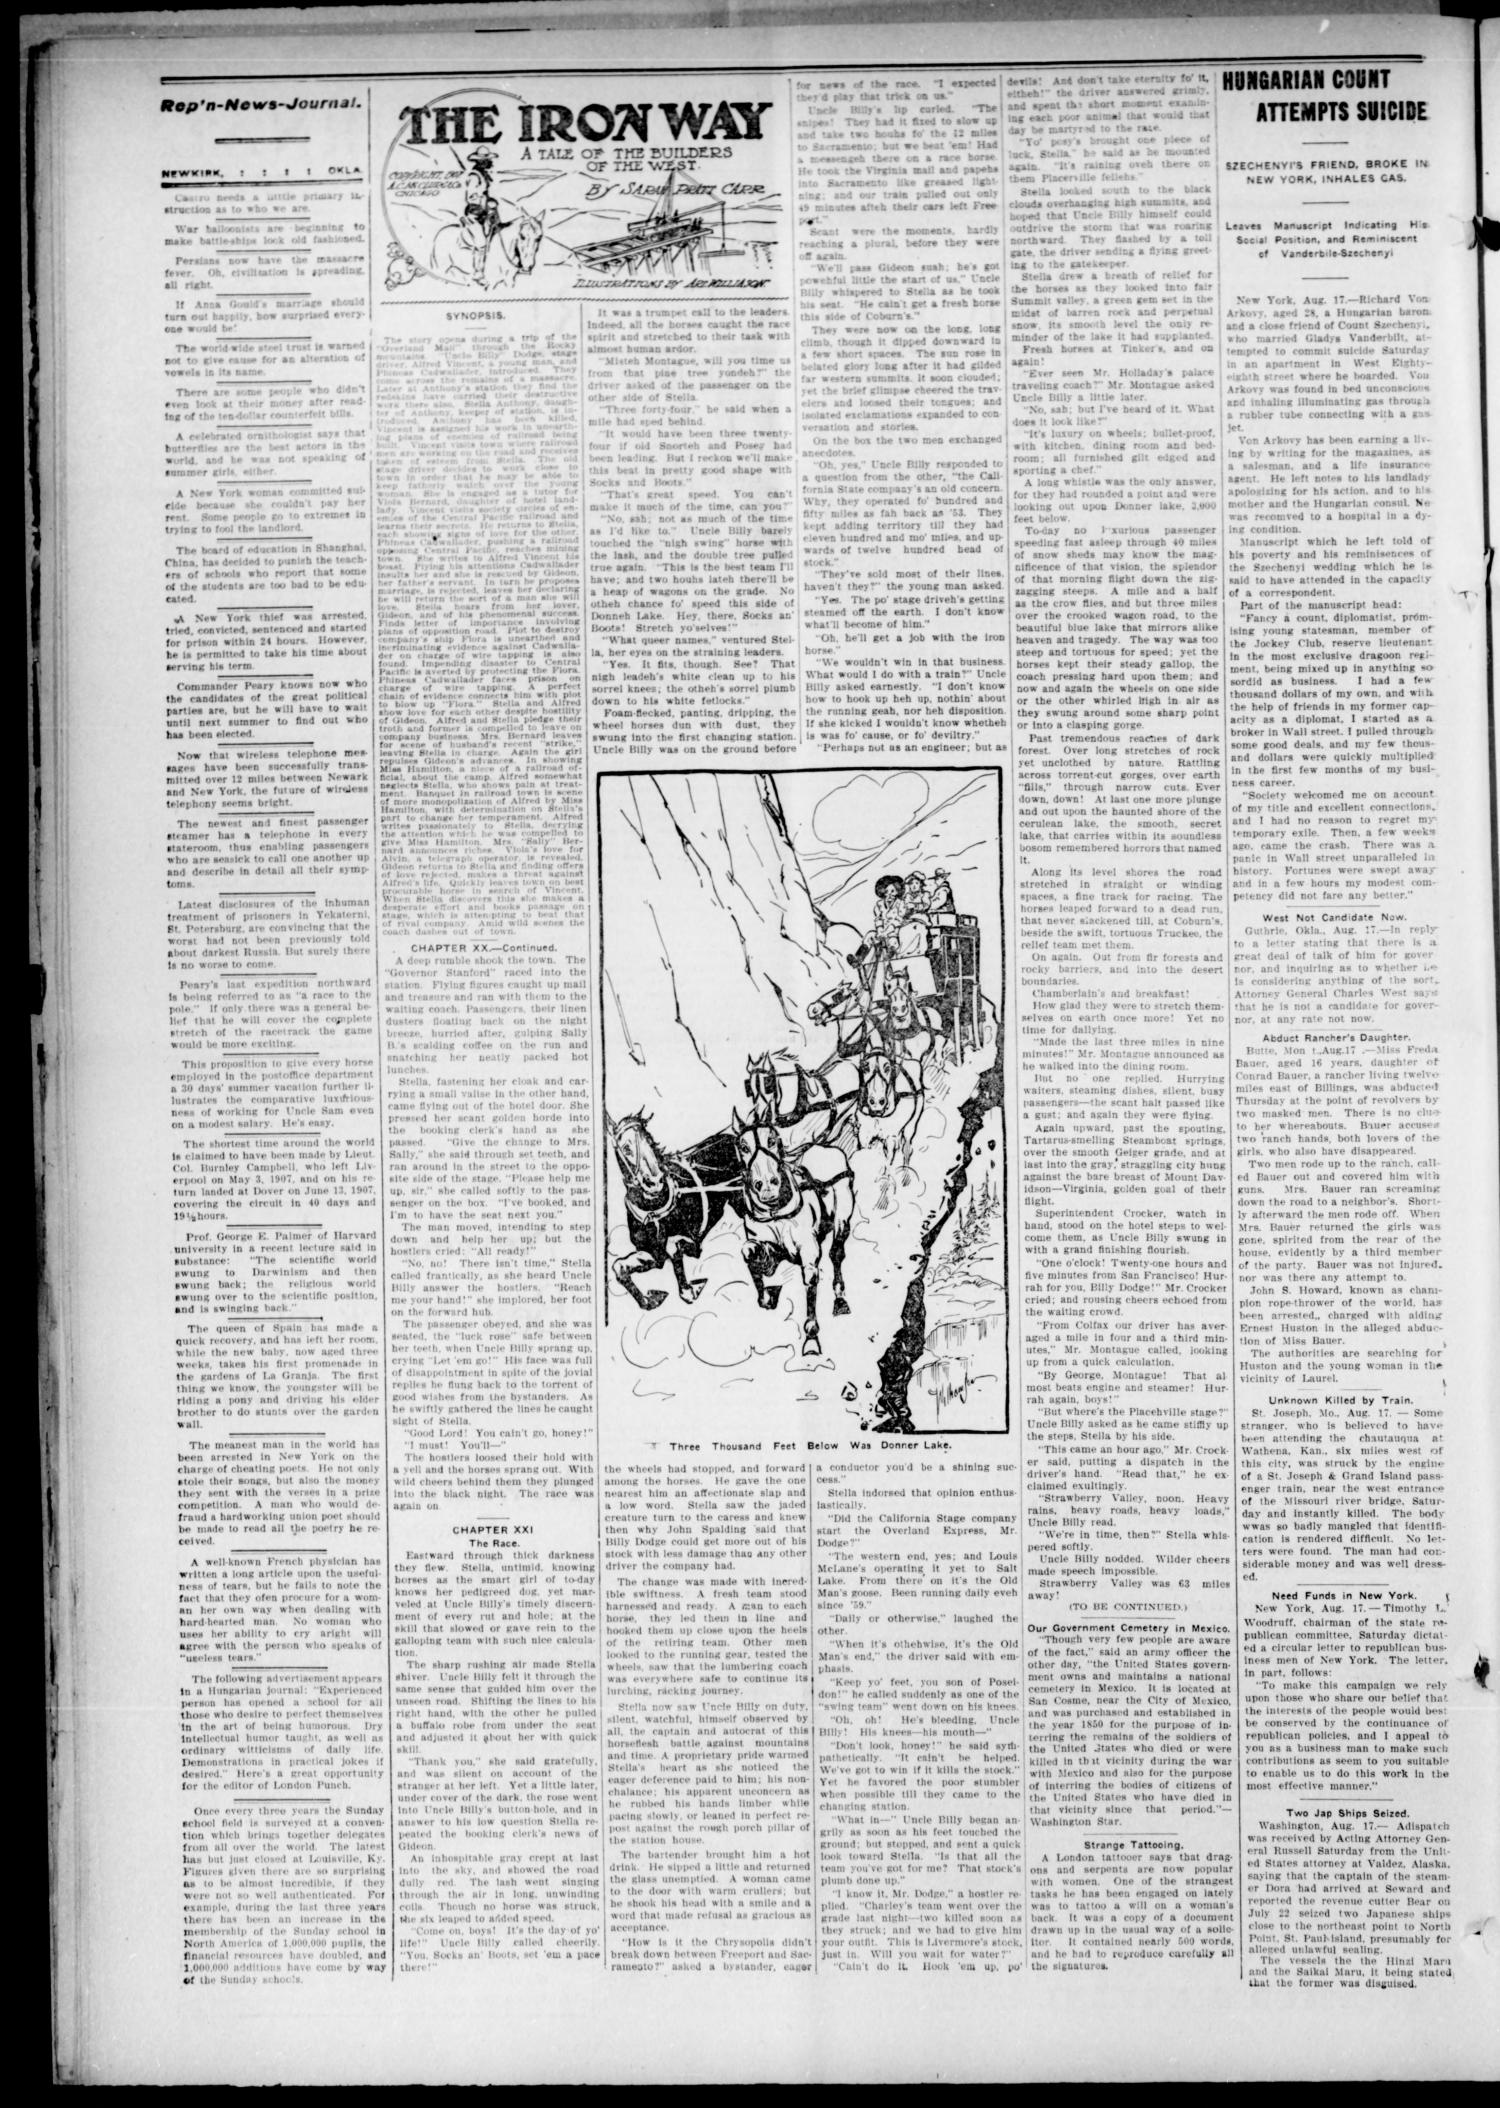 The Republican News Journal. (Newkirk, Okla.), Vol. 15, No. 49, Ed. 1 Friday, August 21, 1908
                                                
                                                    [Sequence #]: 3 of 16
                                                